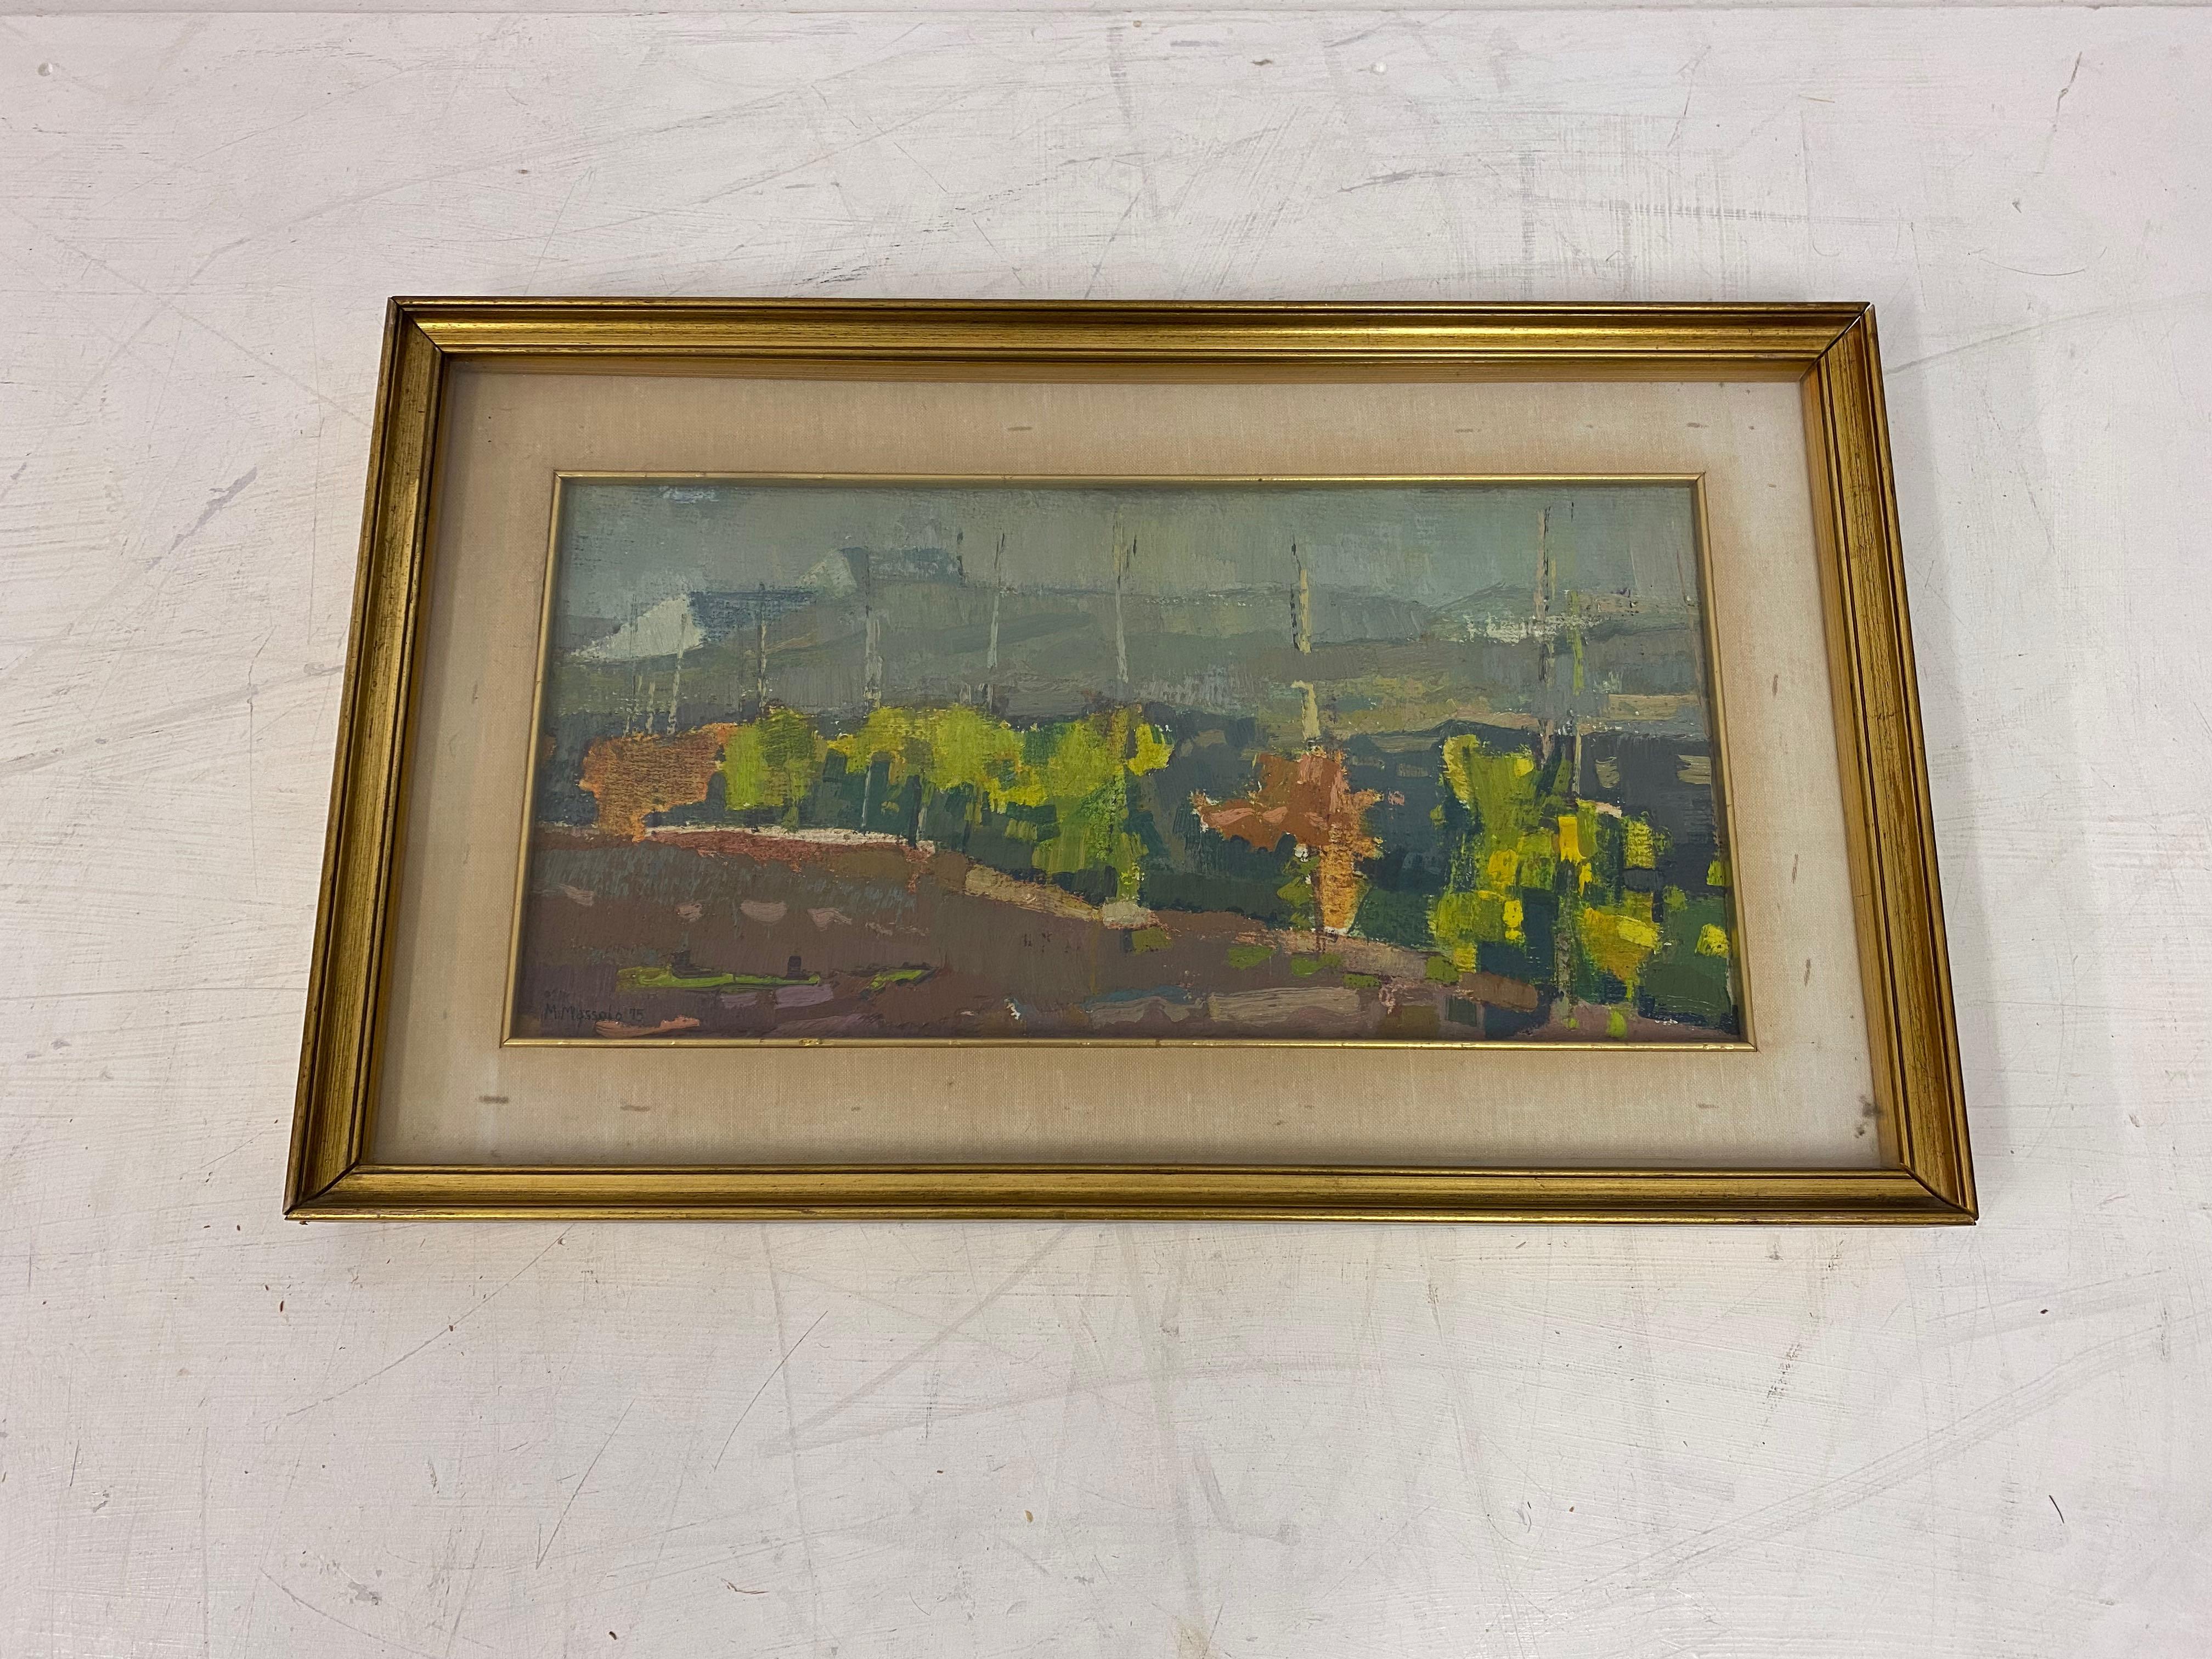 Landscape painting.

Framed and glazed.

Signed and dated on the back.

Italy 1975.